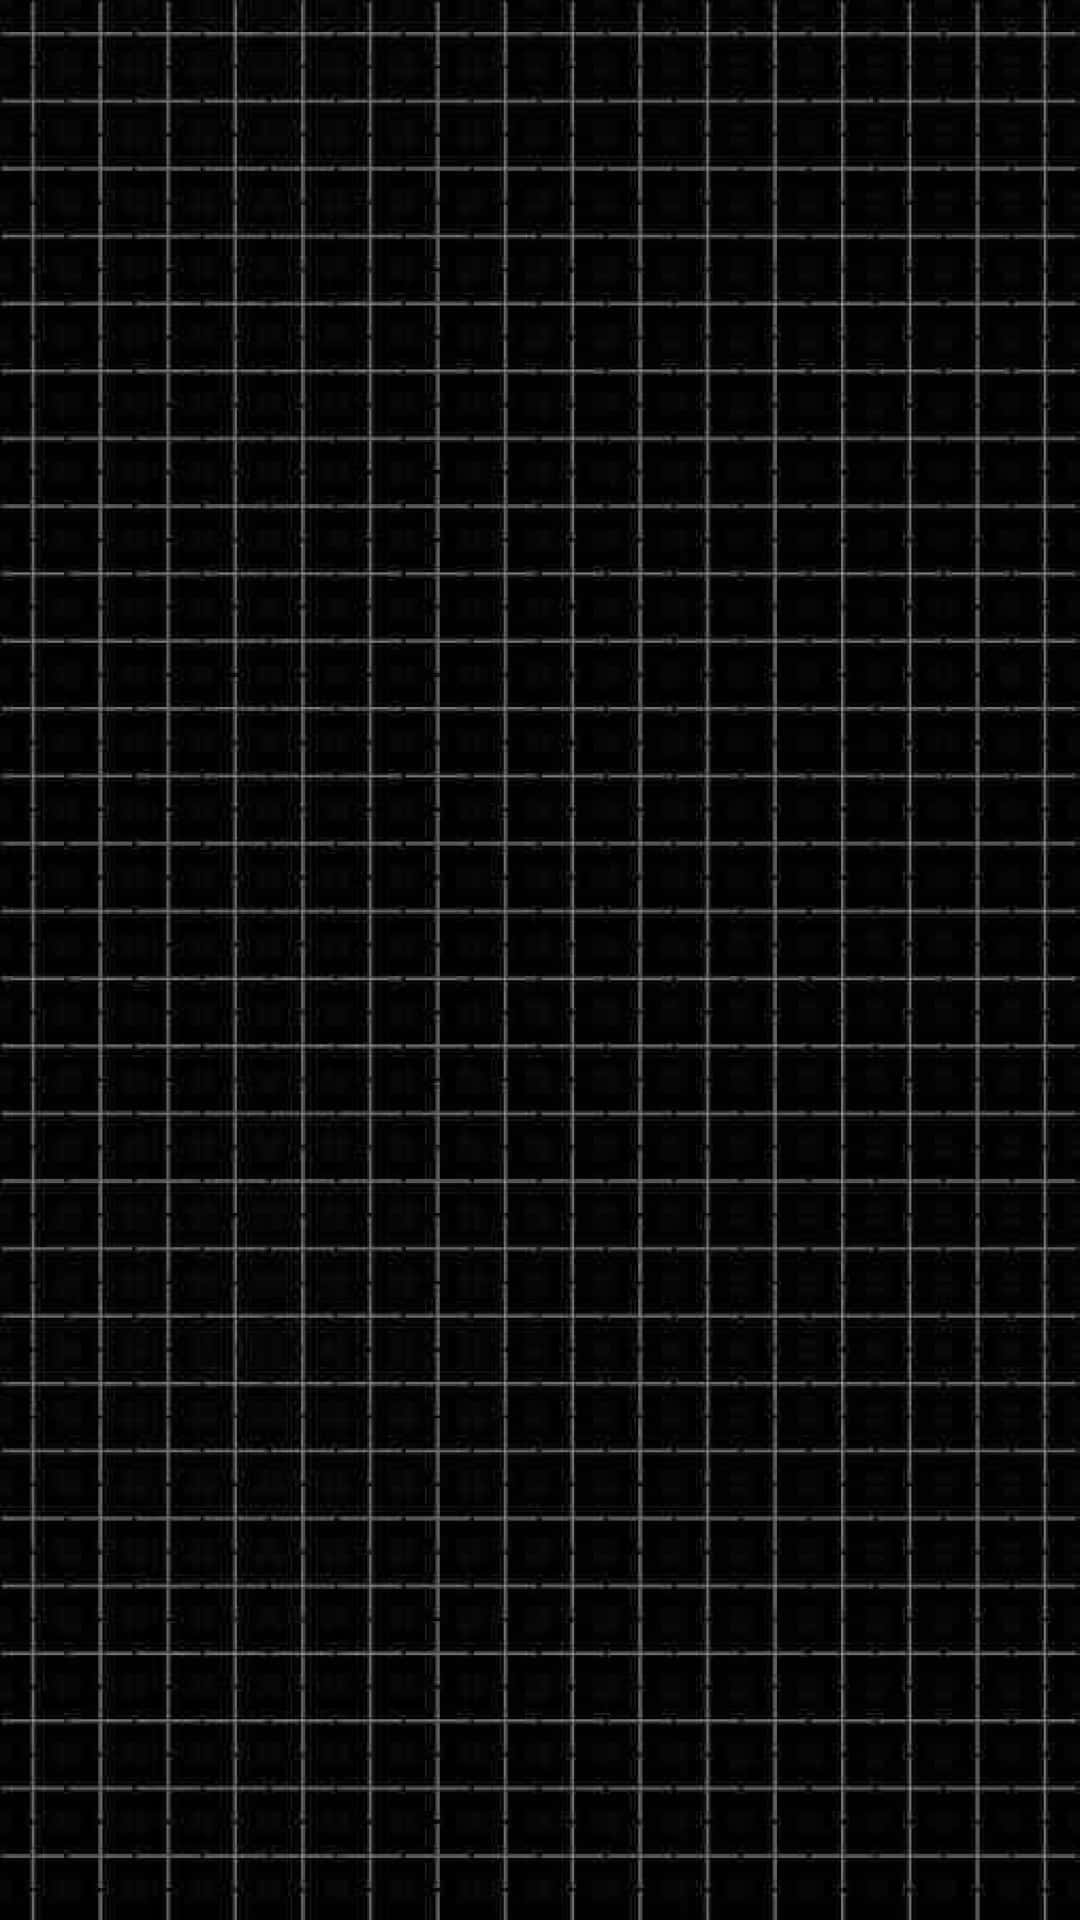 100+] Grid Aesthetic Background s for FREE 